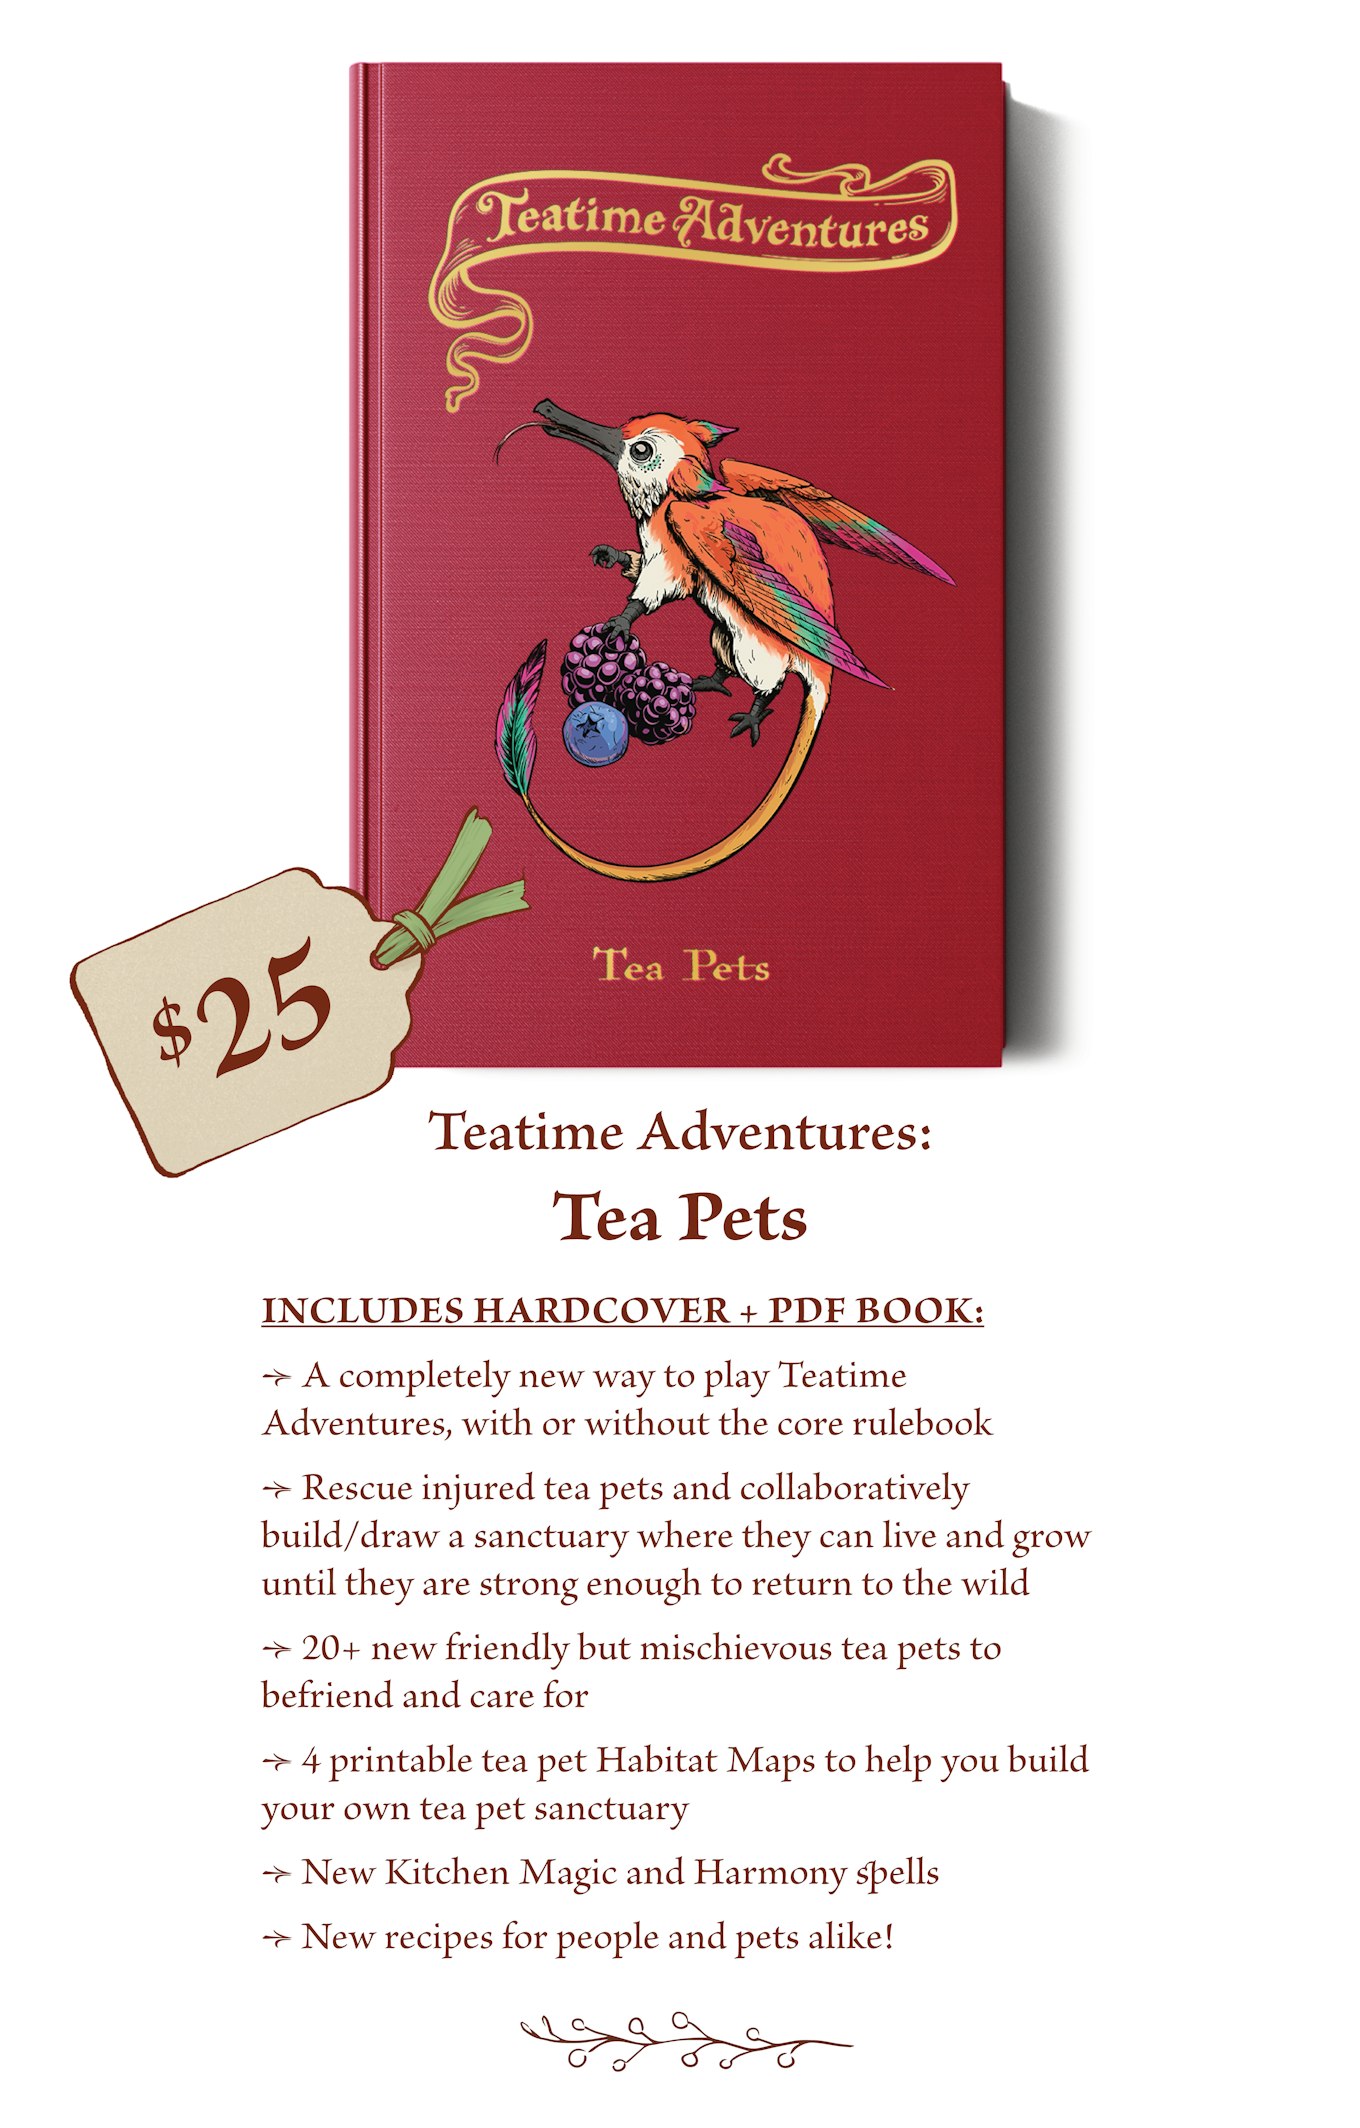 $25 - The Teatime Adventures: Tea Pets book includes: A completely new way to play Teatime Adventures, with or without the core rulebook Rescue injured tea pets and collaboratively build/draw a sanctuary where they can live and grow until they are strong enough to return to the wild. 20+ new friendly but mischievous tea pets to befriend and care for. 4 printable tea pet Habitat Maps to help you build your own tea pet sanctuary. New Kitchen Magic and Harmony spells. New recipes for people and pets alike! 